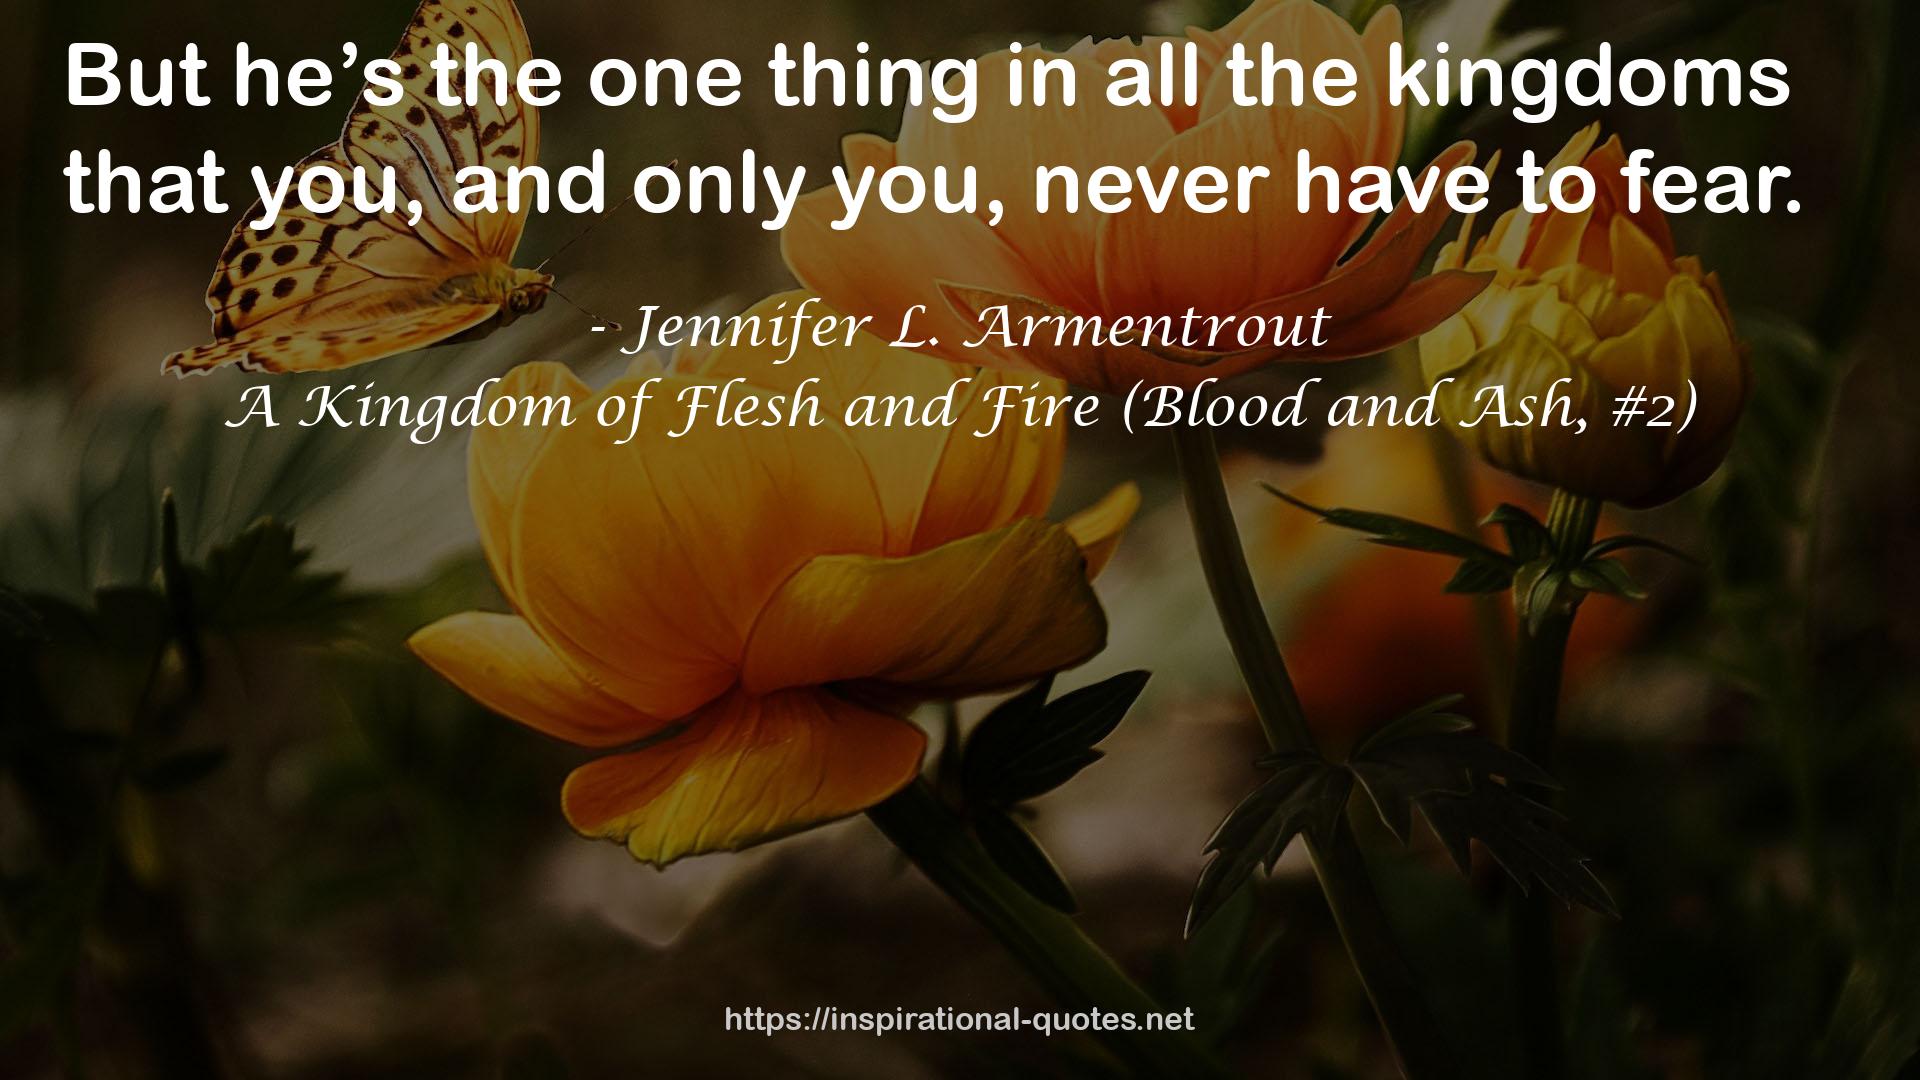 A Kingdom of Flesh and Fire (Blood and Ash, #2) QUOTES